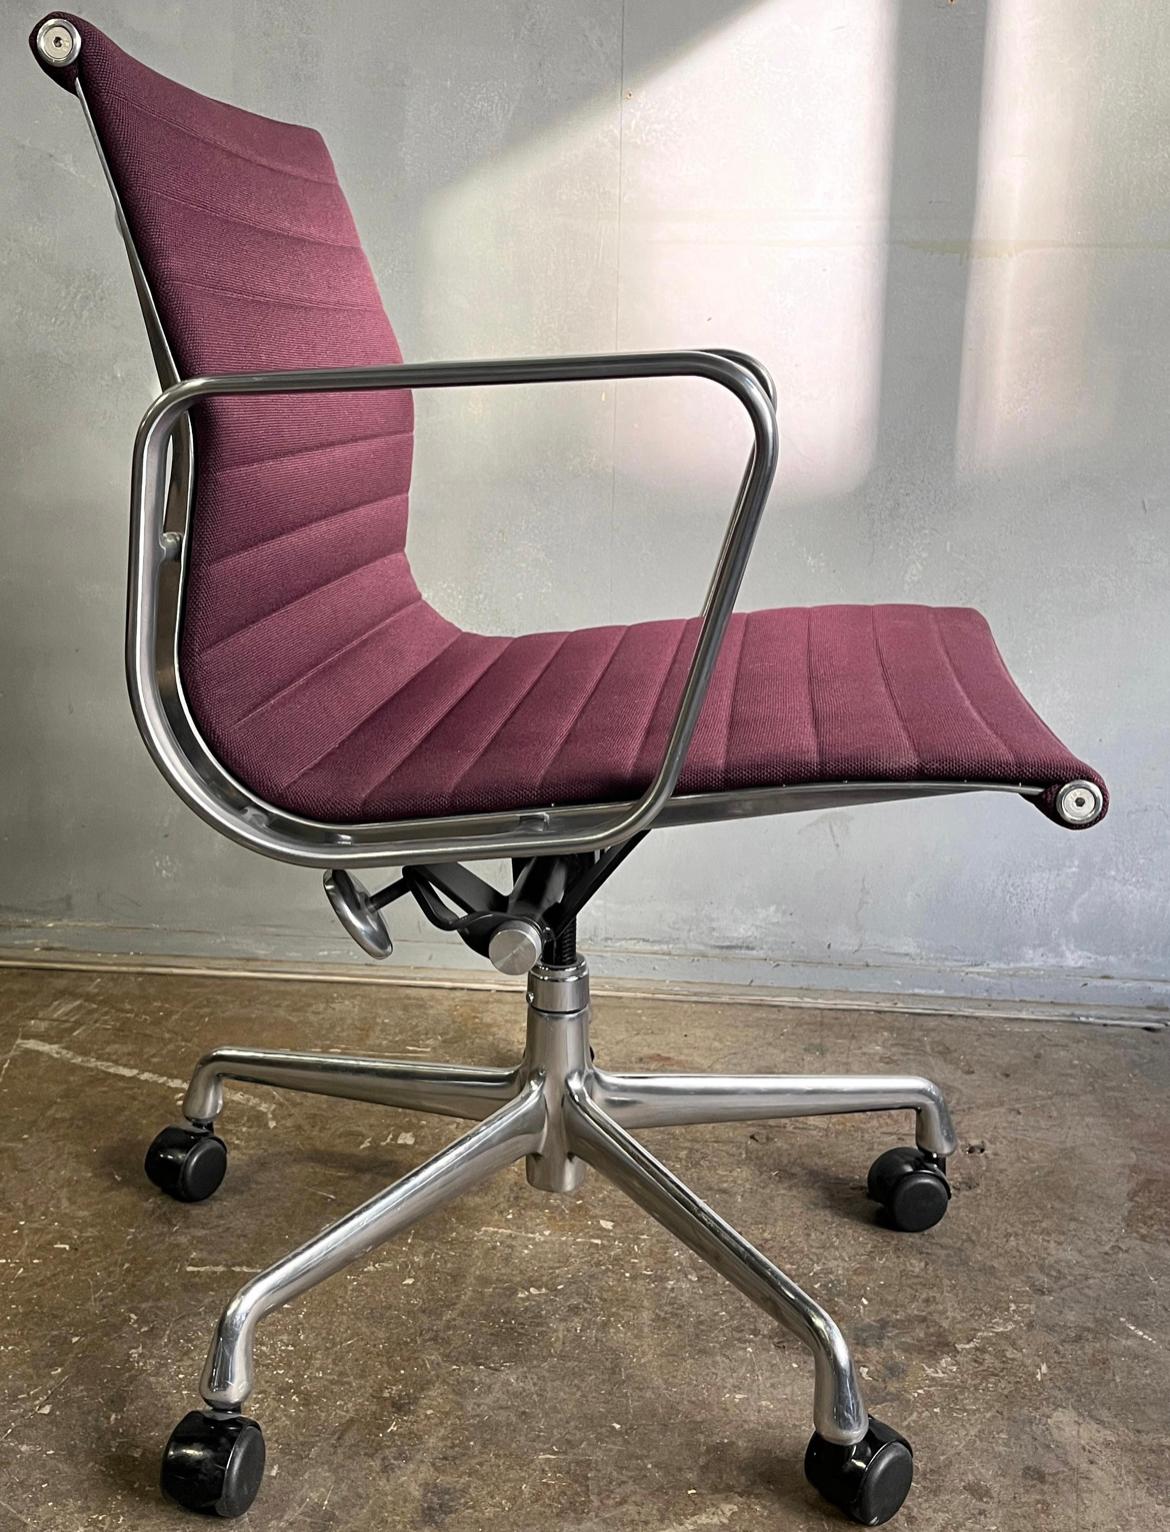 For your consideration are these Eames Aluminum Group chairs upholstered in gorgeous purple fabric. Elegance and comfort separates this iconic chair from the rest. The upholstery is in wonderful condition with the arms having some minor scuffs and